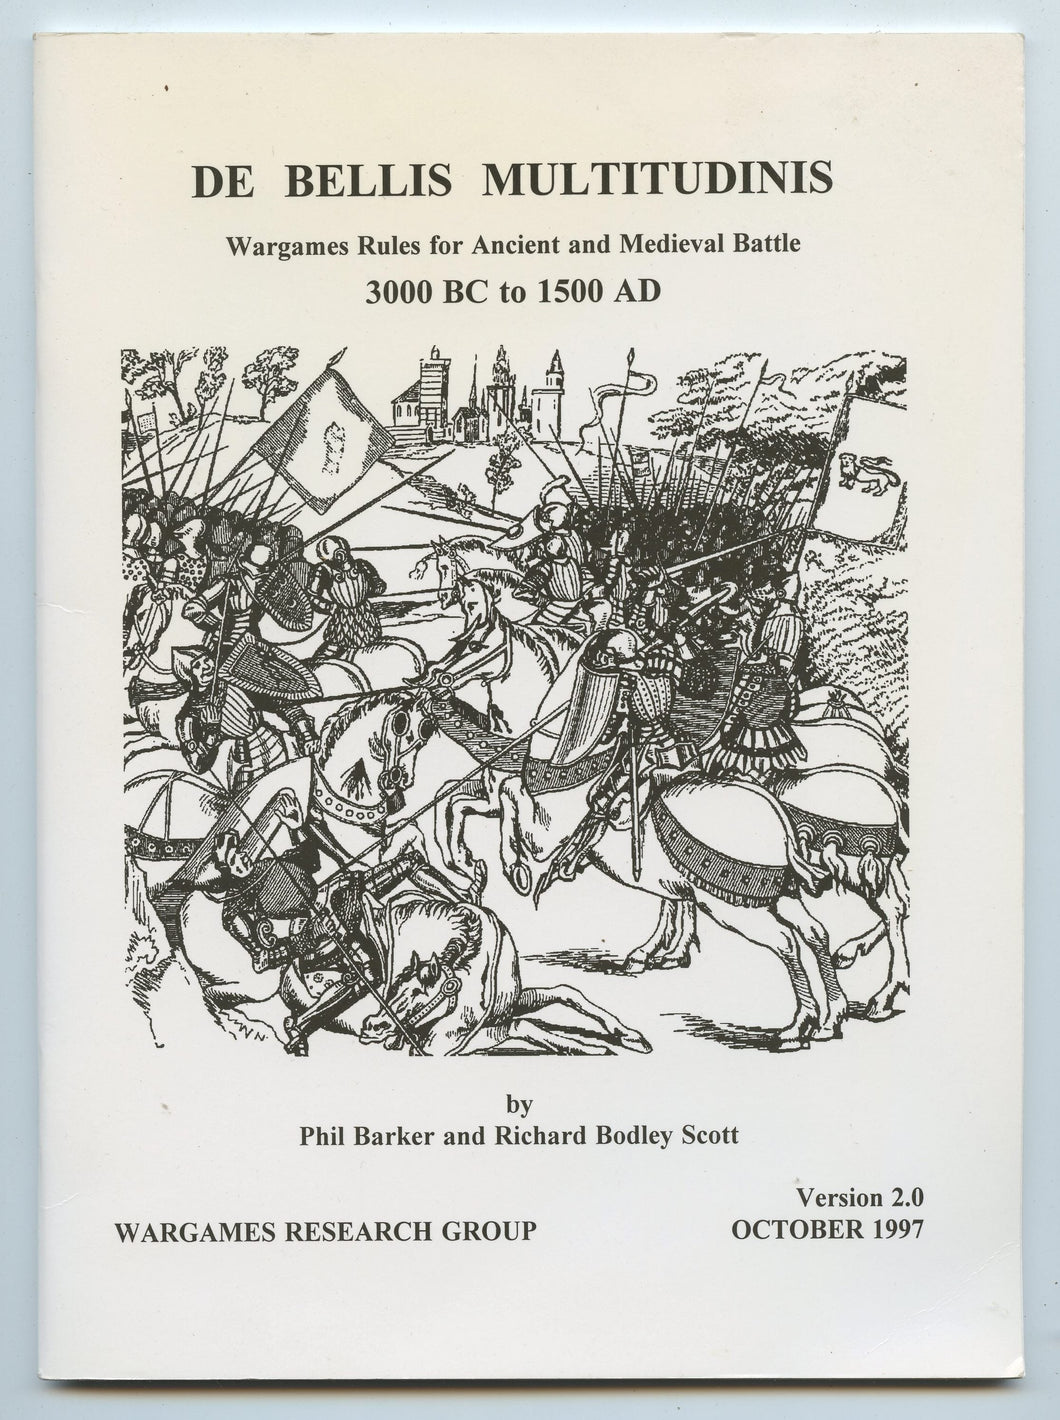 De Bellis Multitudinis: Wargames Rules for Ancient and Medieval Battle 3000 BC to 1500 AD